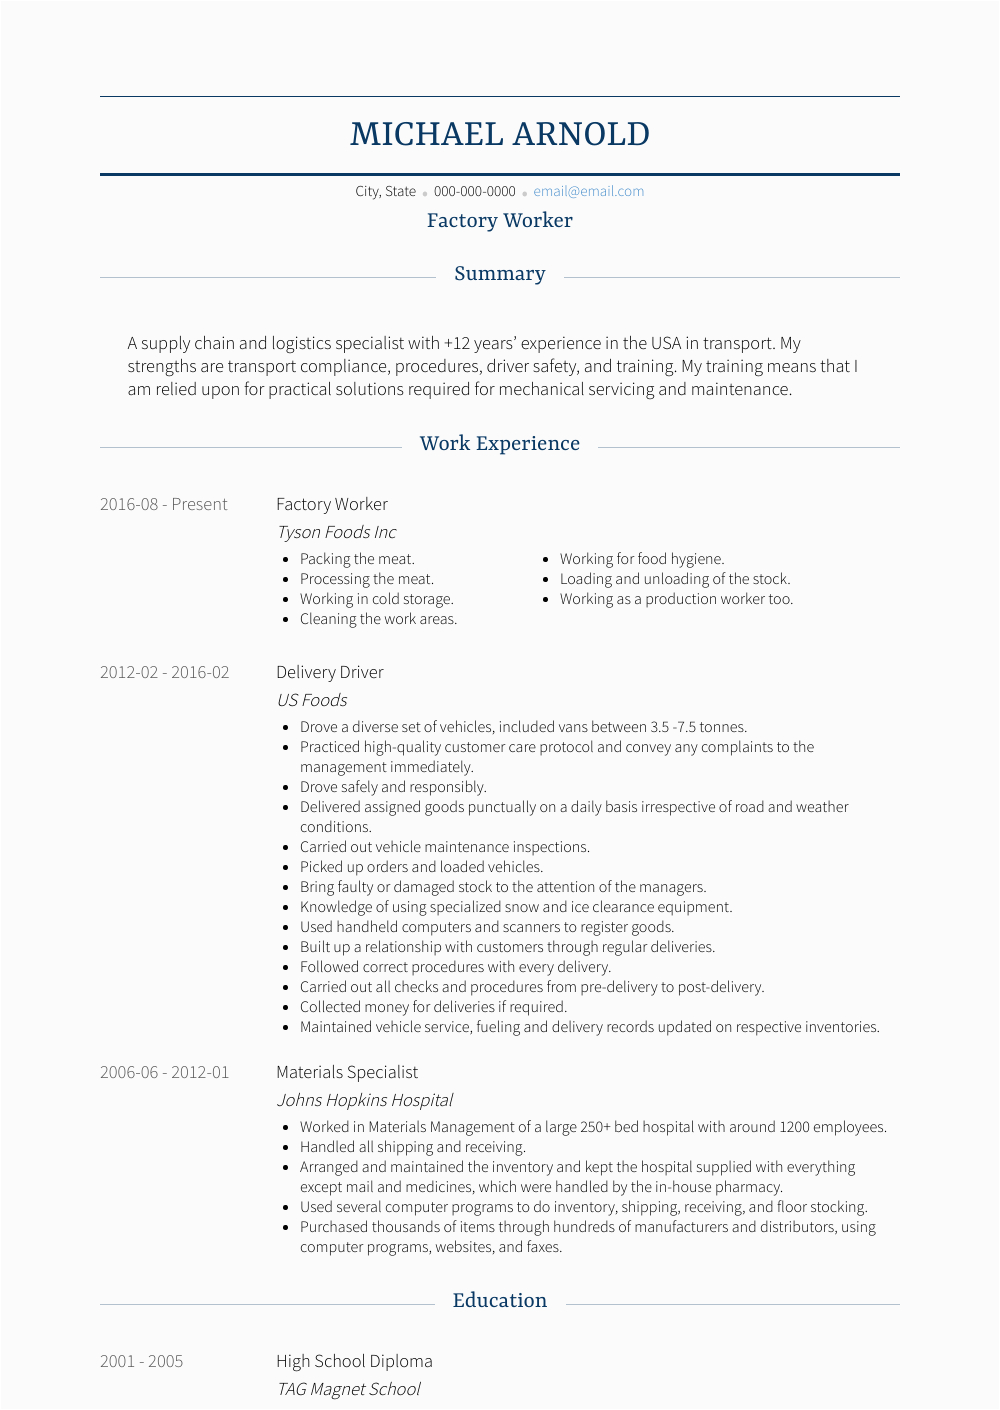 Resume Samples for A Factory Position Factory Worker Resume Samples and Templates